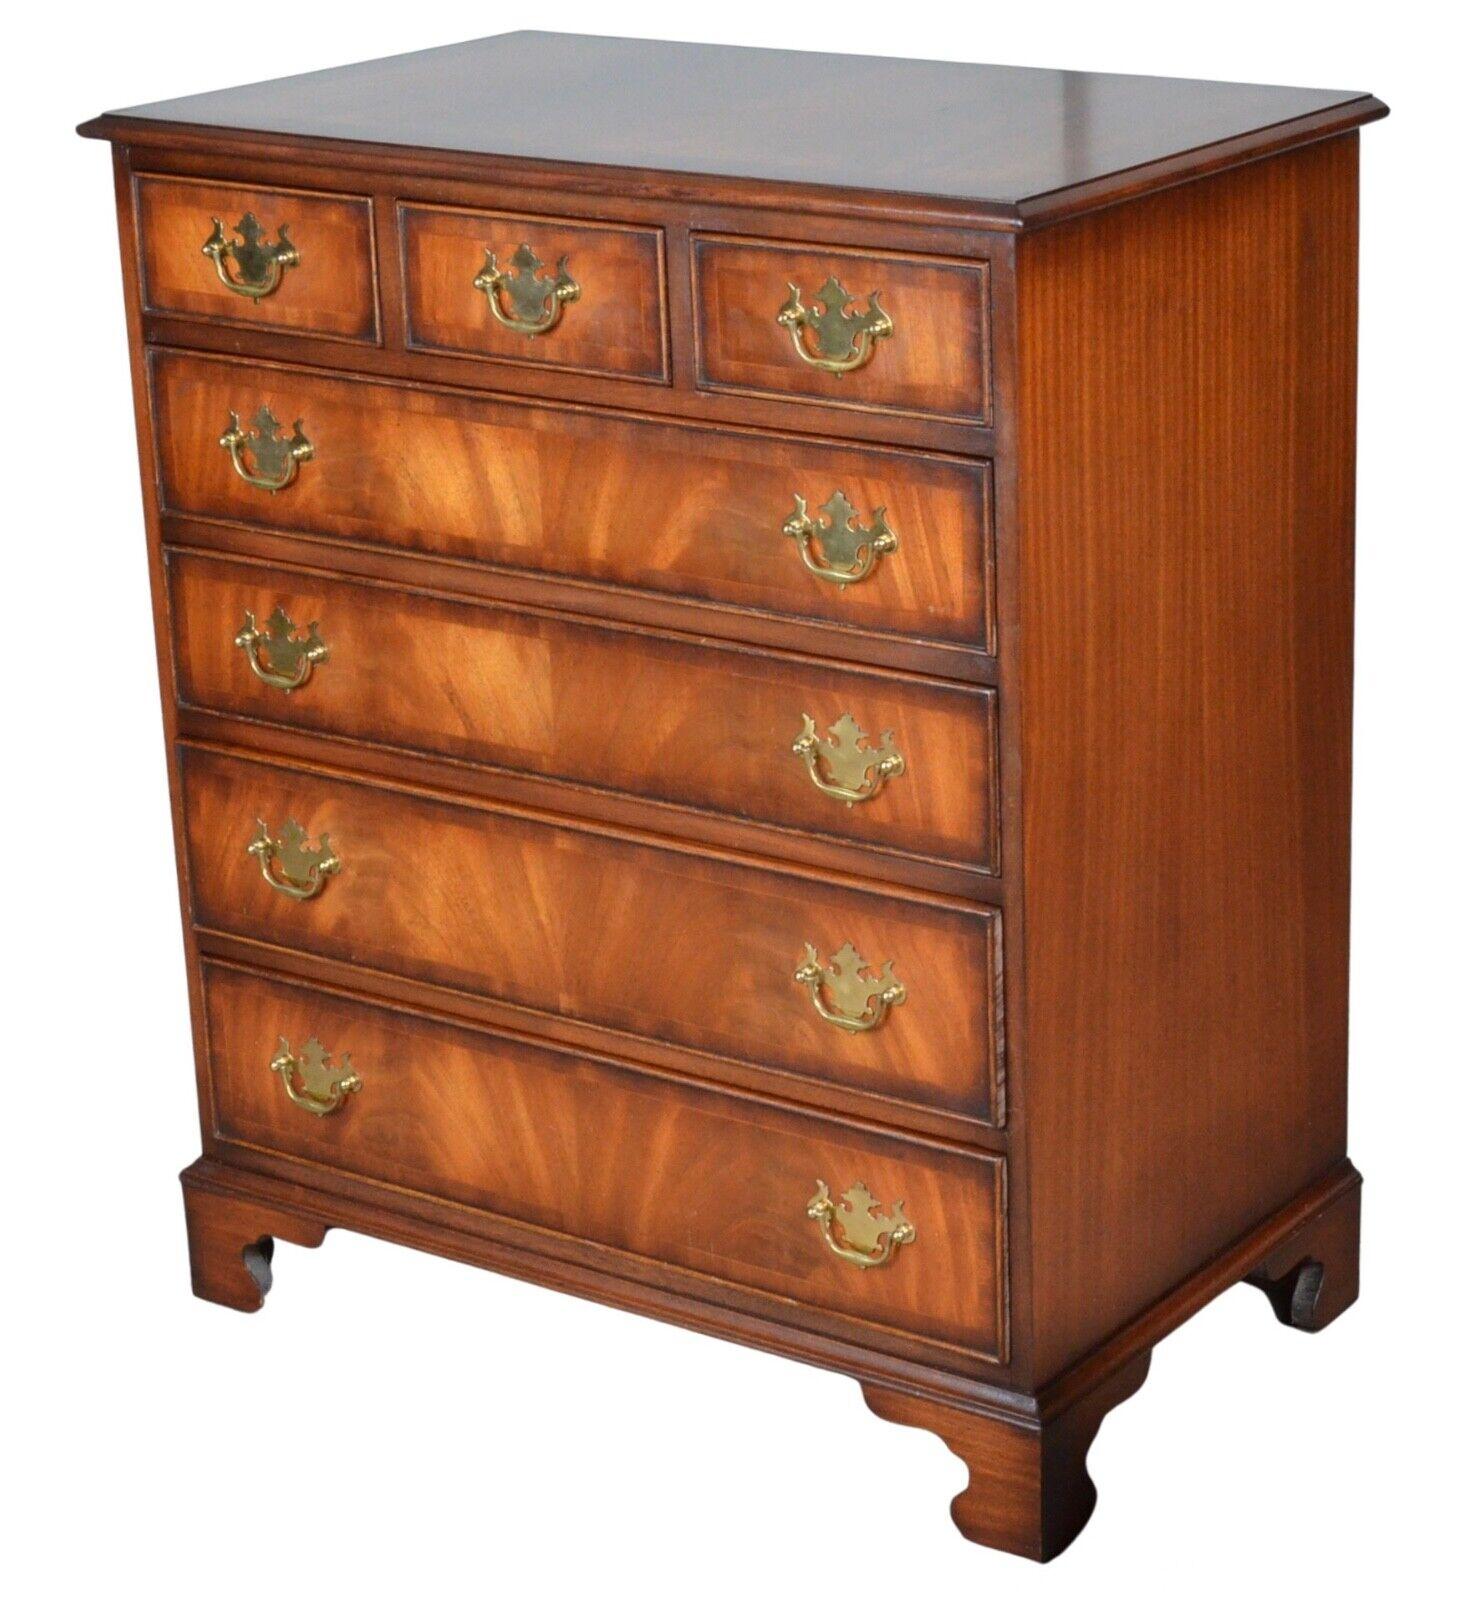 Brass Lovely Antique Georgian Hardwood Chest of Drawers with a Hidden Drawer For Sale